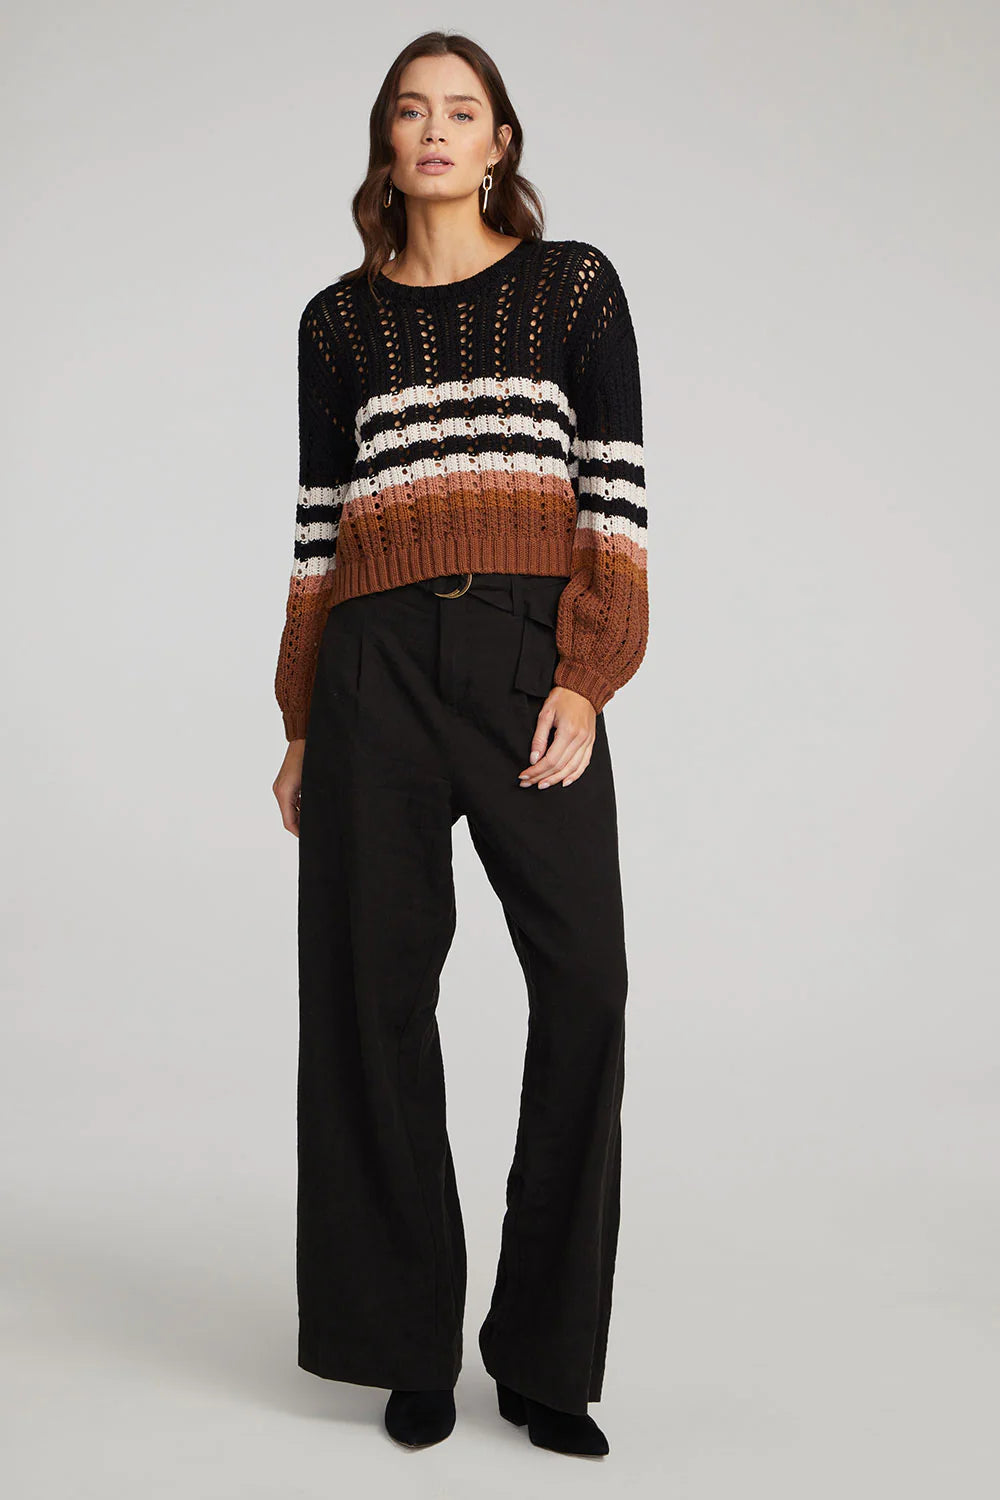 Saltwater Luxe ‘Mimi Sweater’